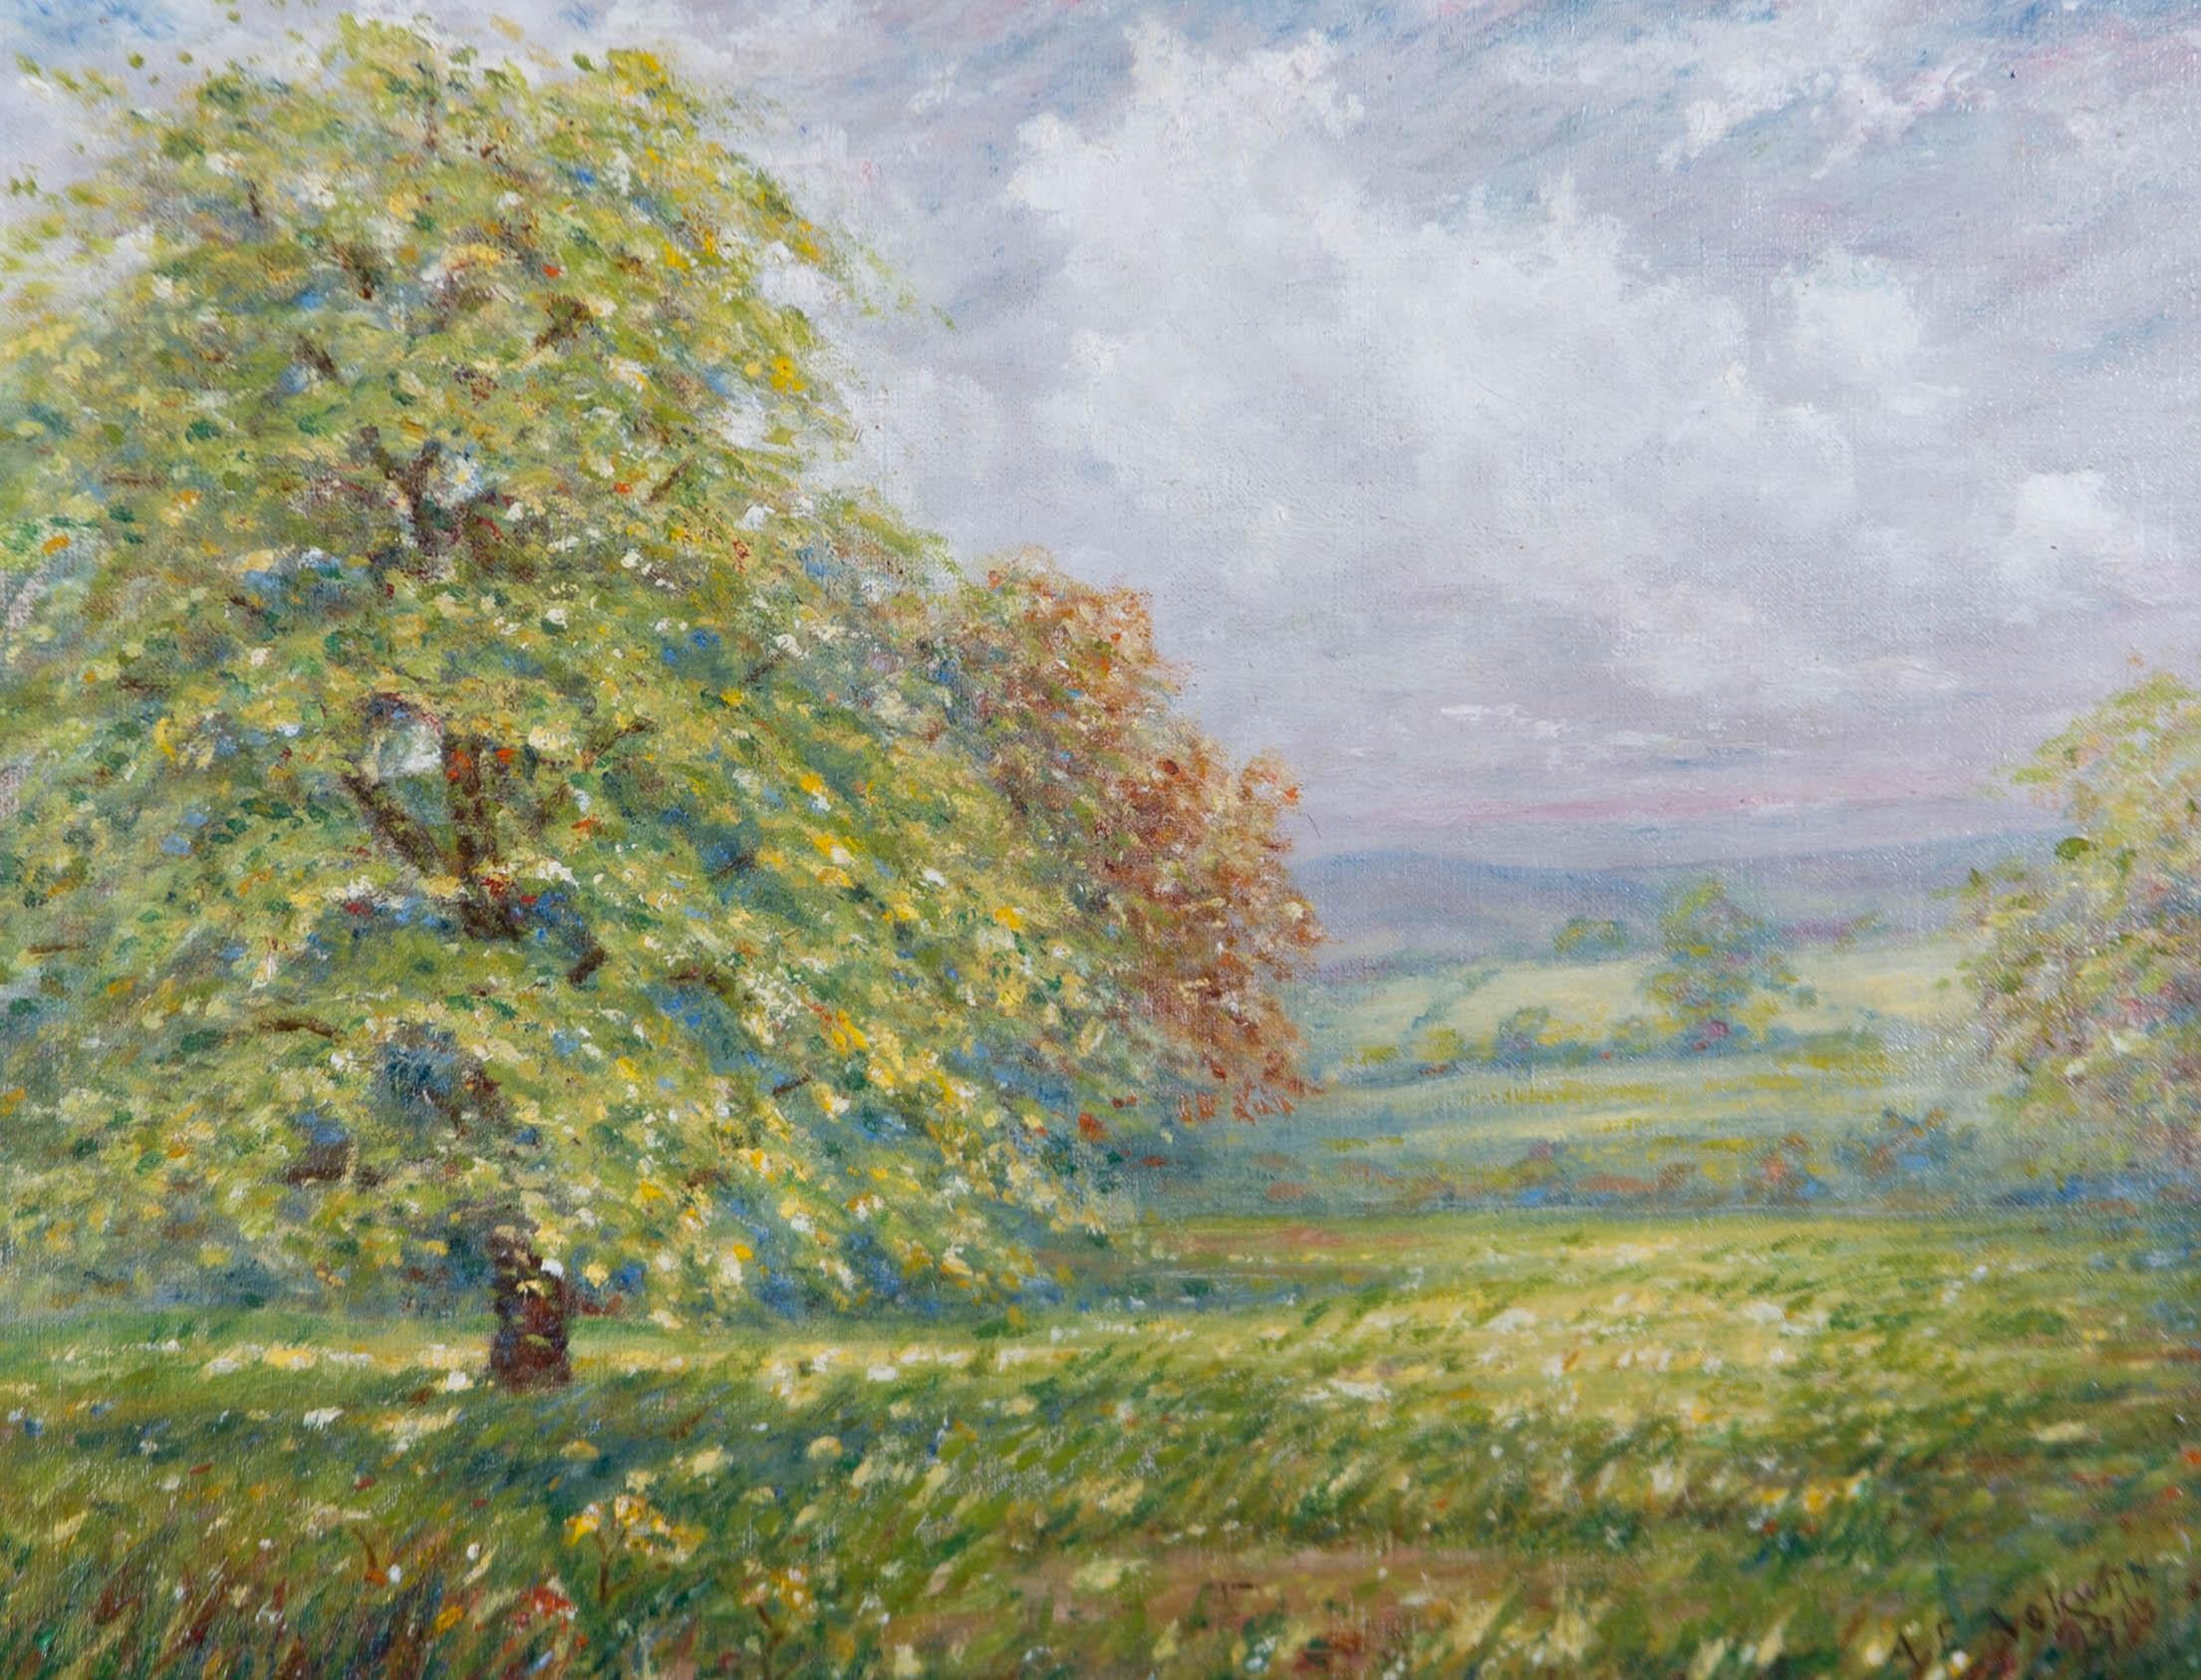 An impressionistic landscape of springtime in Gomersal, West Yorkshire. Presented in a wooden frame with gilt-effect slip. Signed and dated to the lower-right corner. Inscribed with the title to the reverse. On canvas on stretchers.
